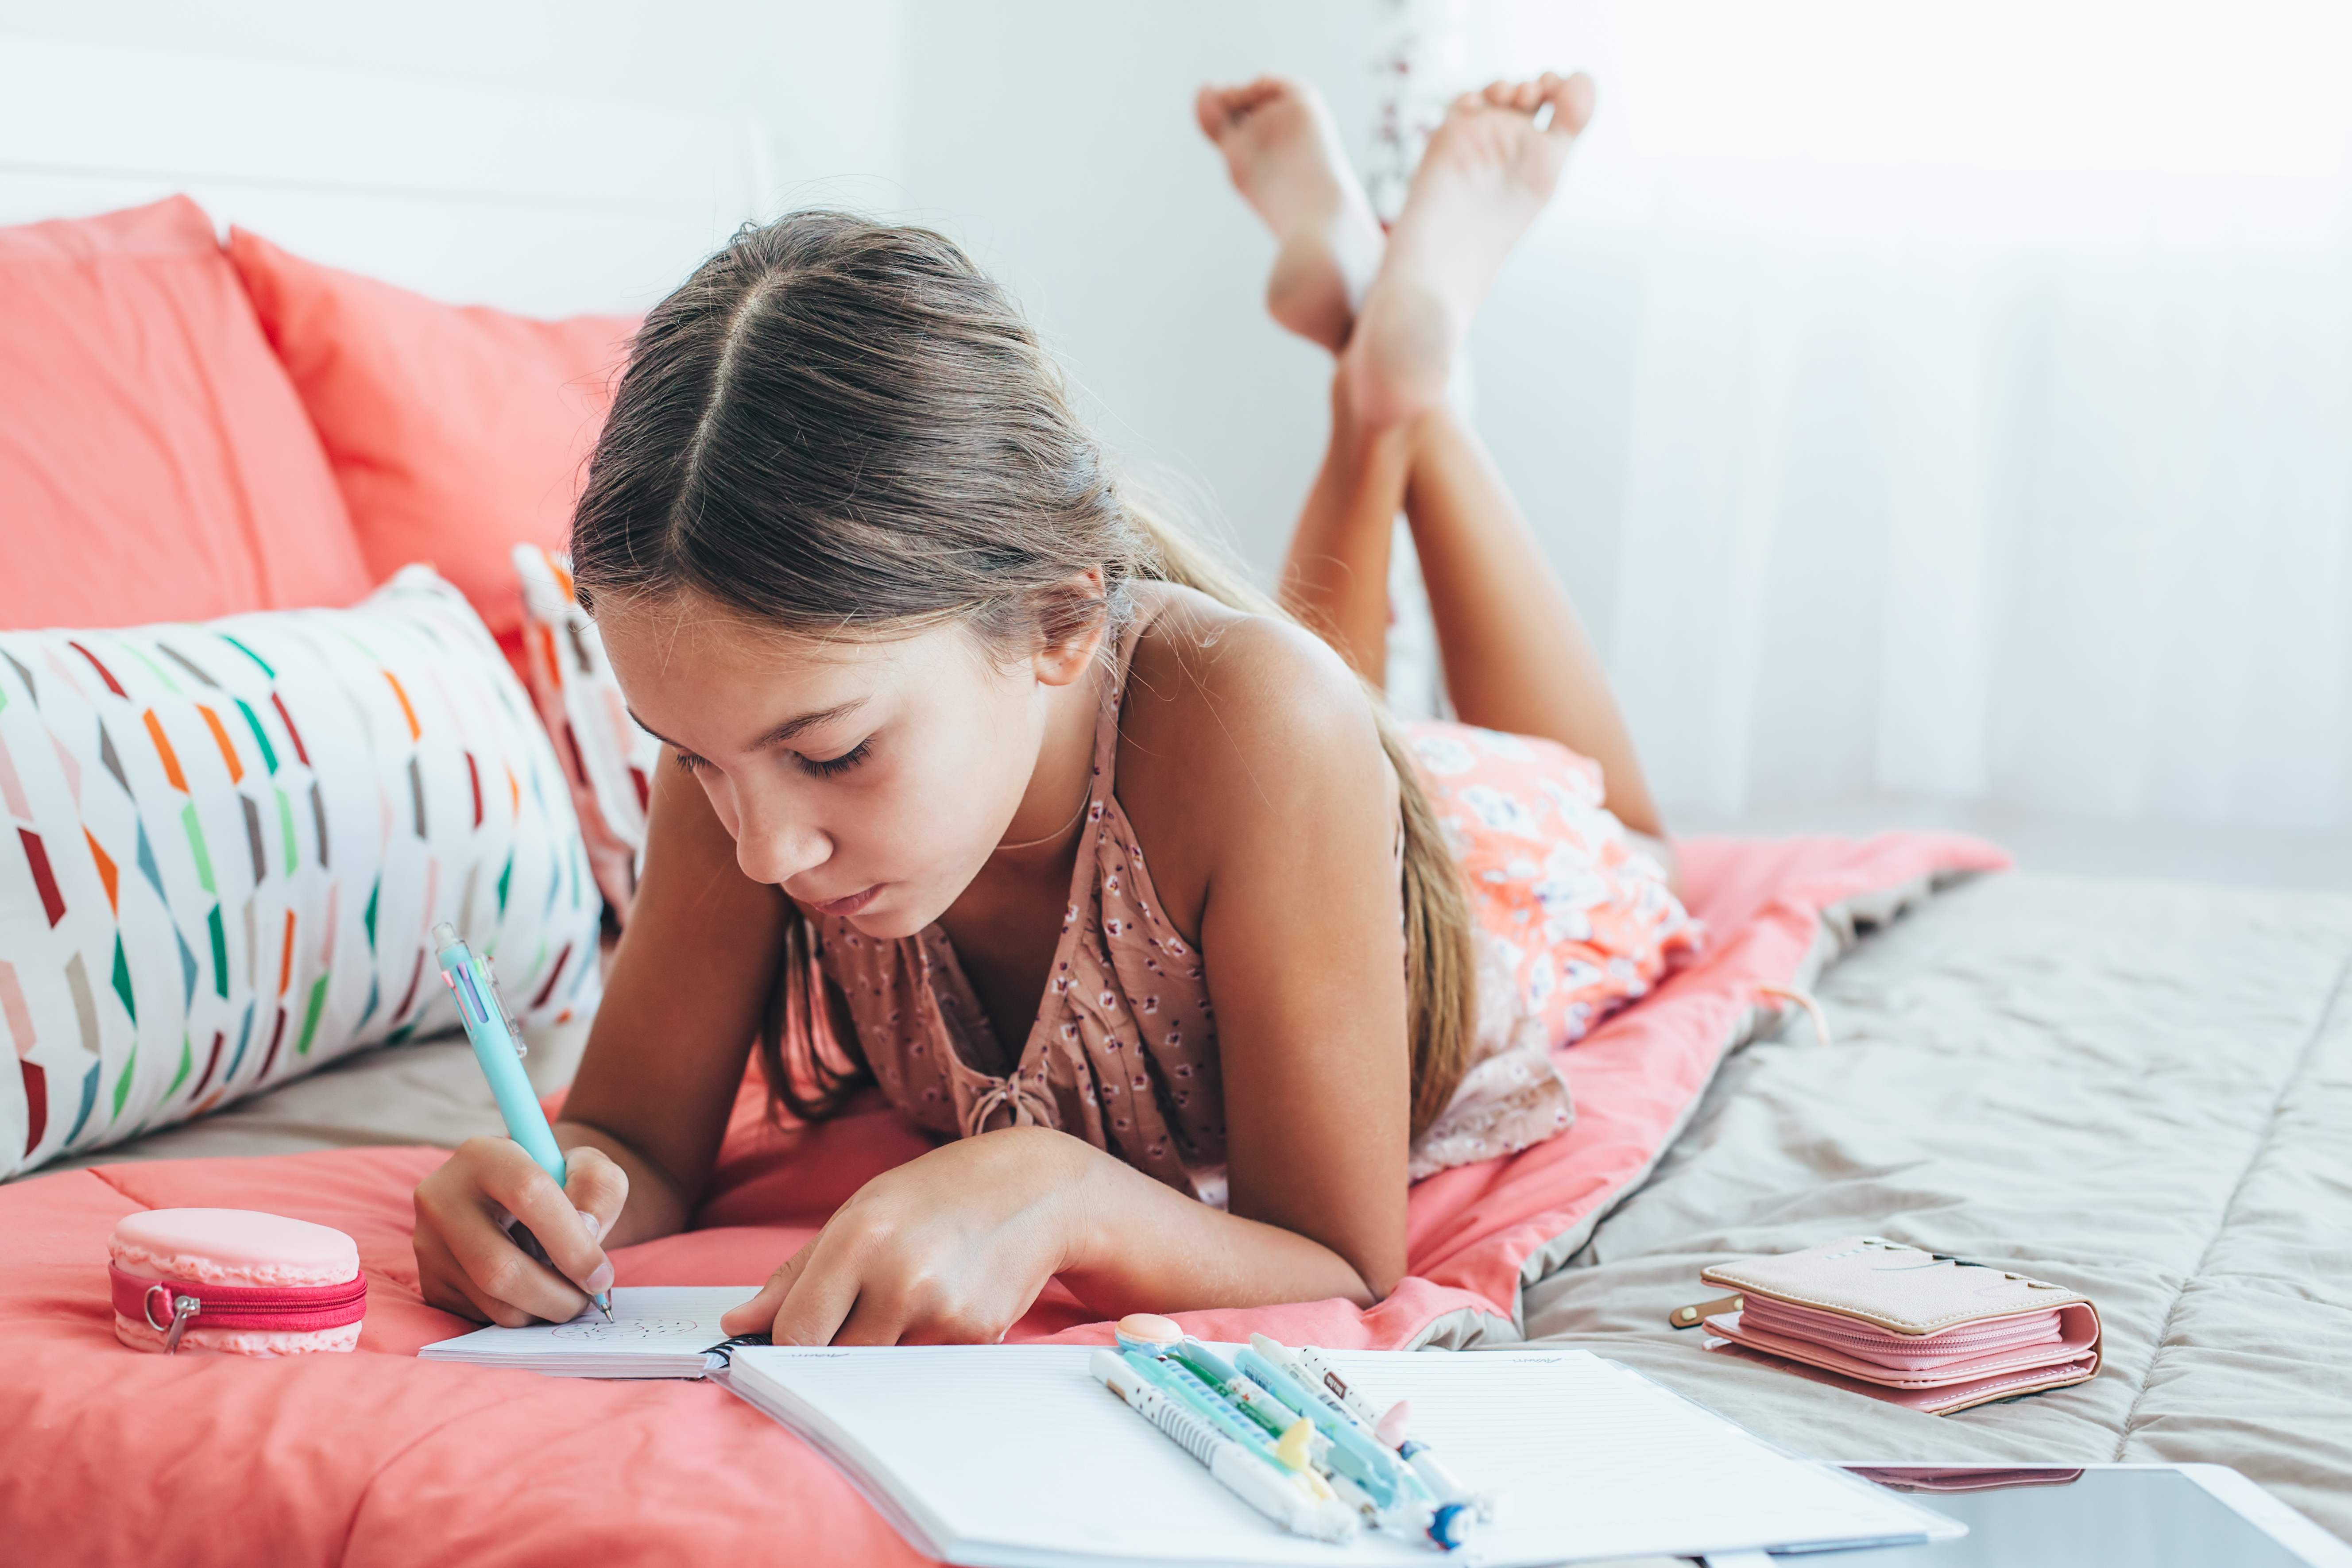 A young girl is pictured writing a diary in her room | Source: Shutterstock